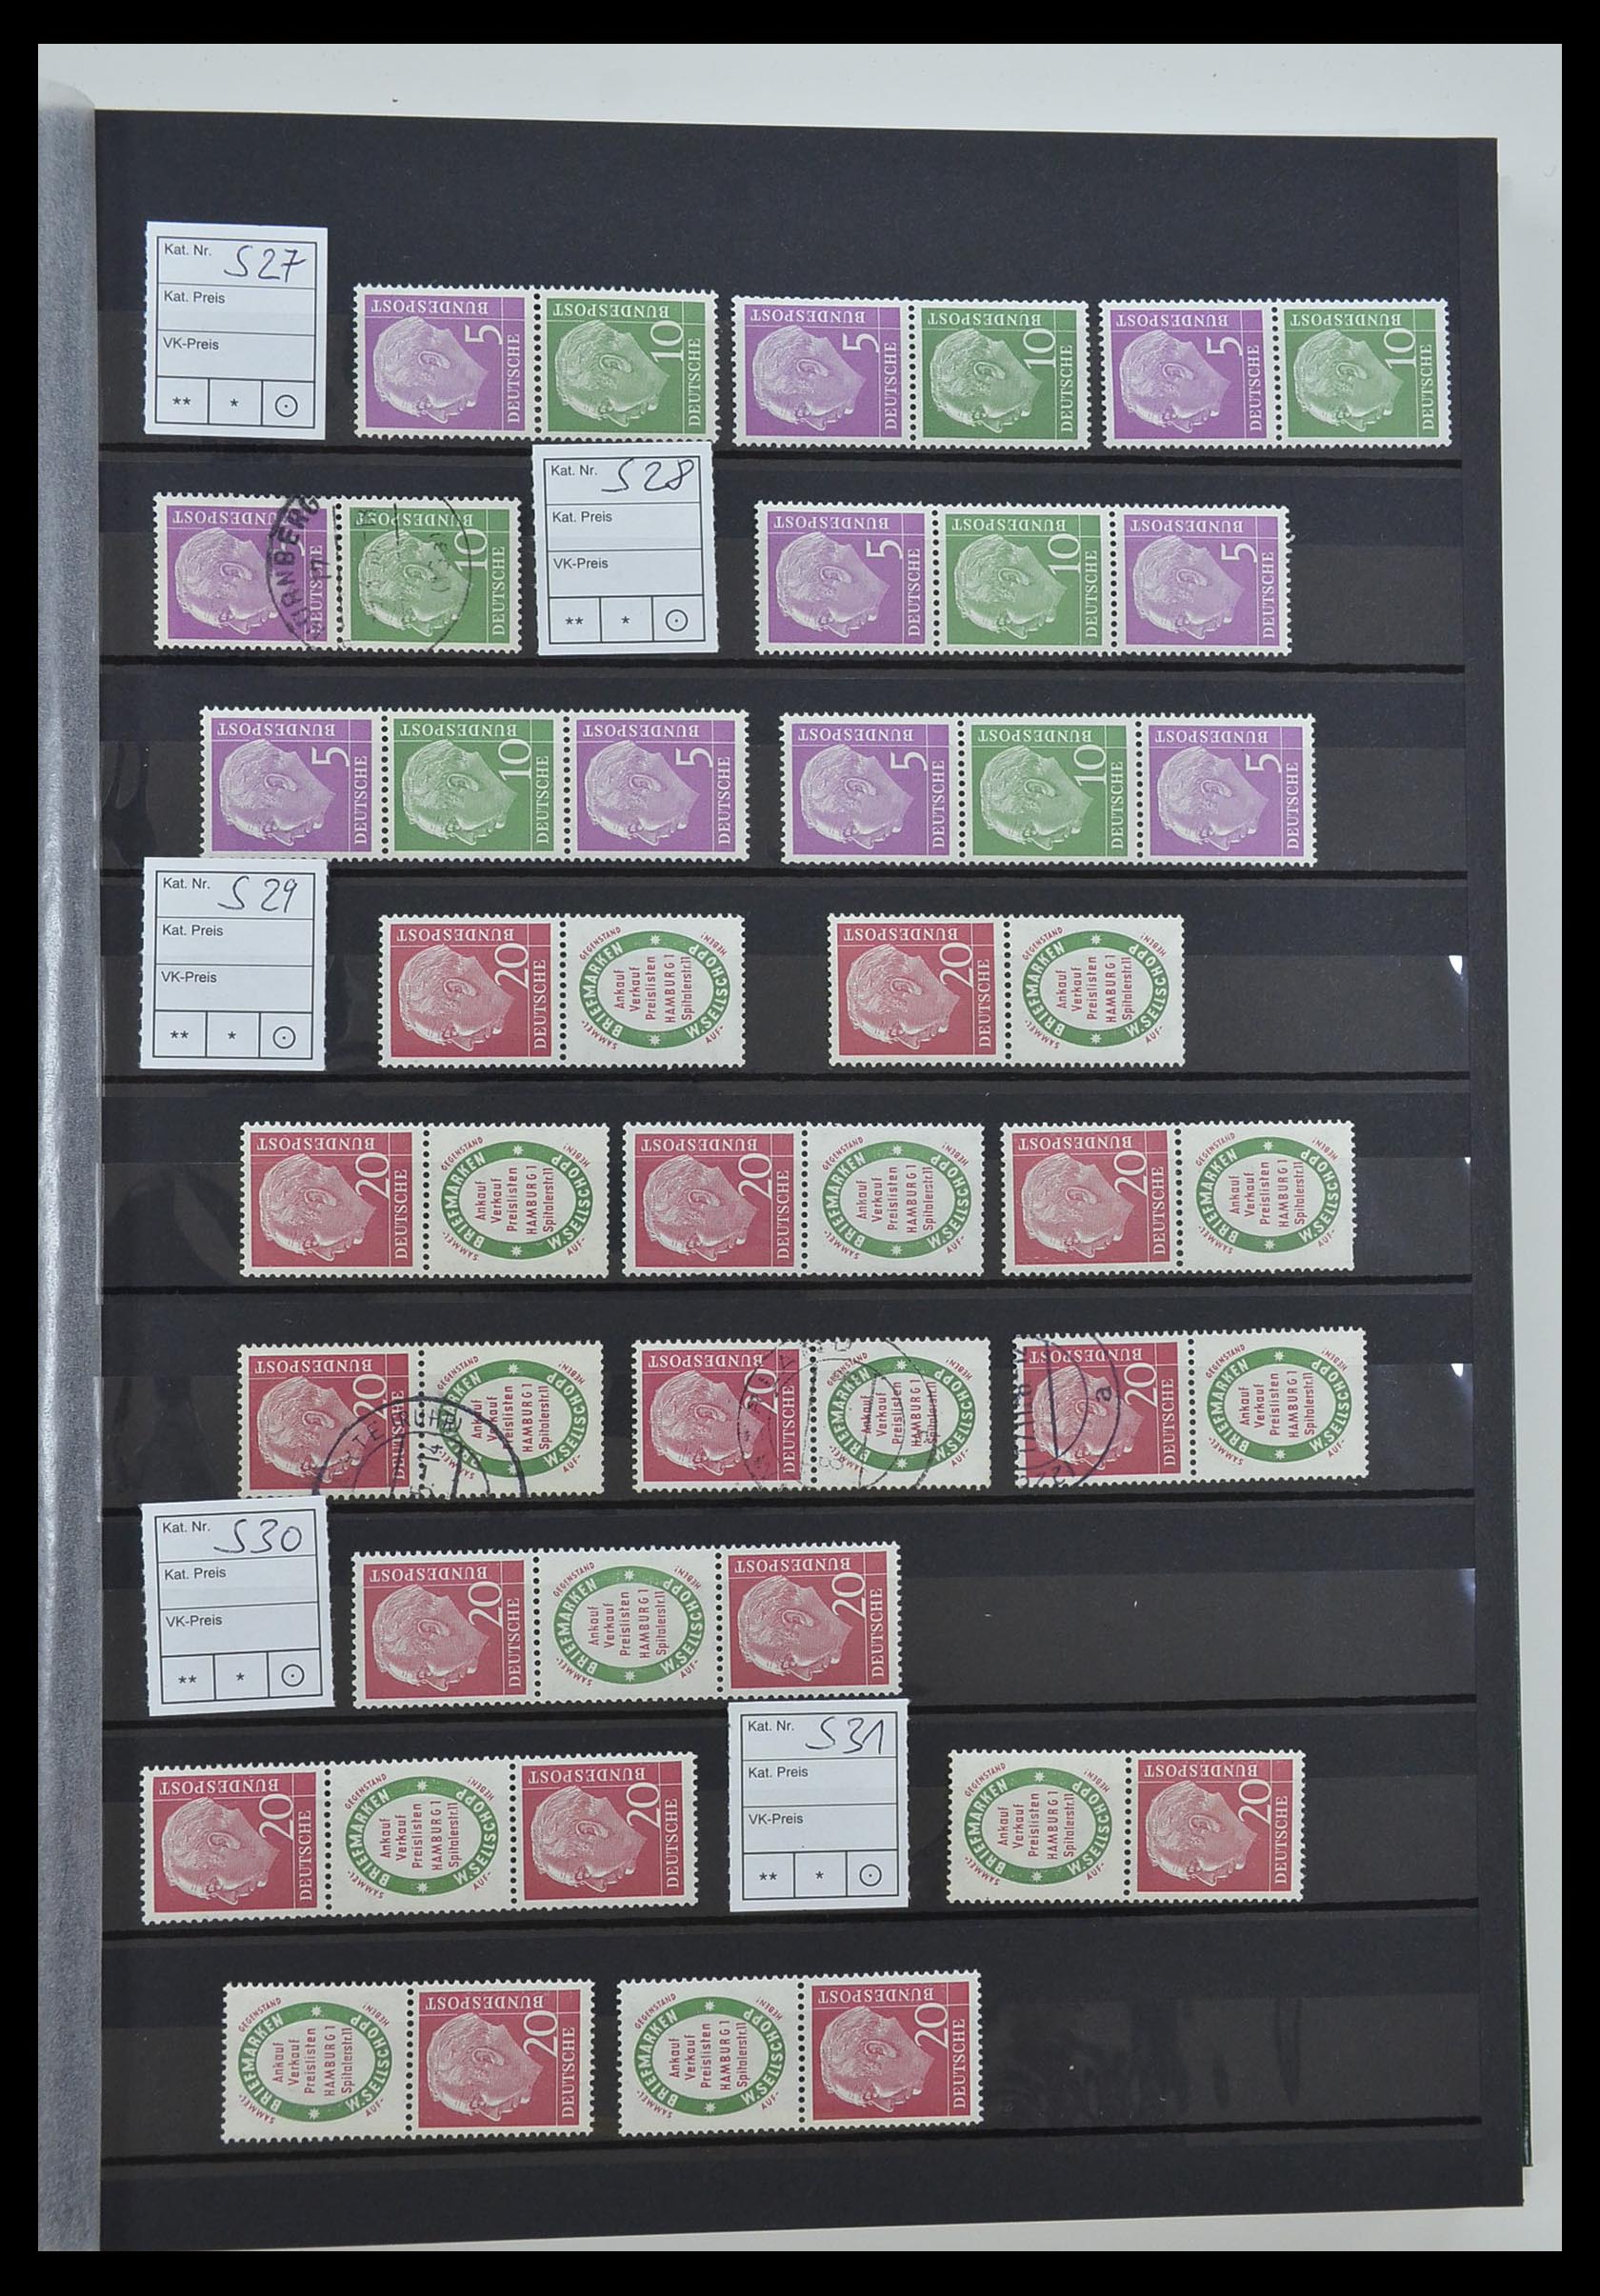 33275 011 - Stamp collection 33275 Bundespost combinations 1951-1960.